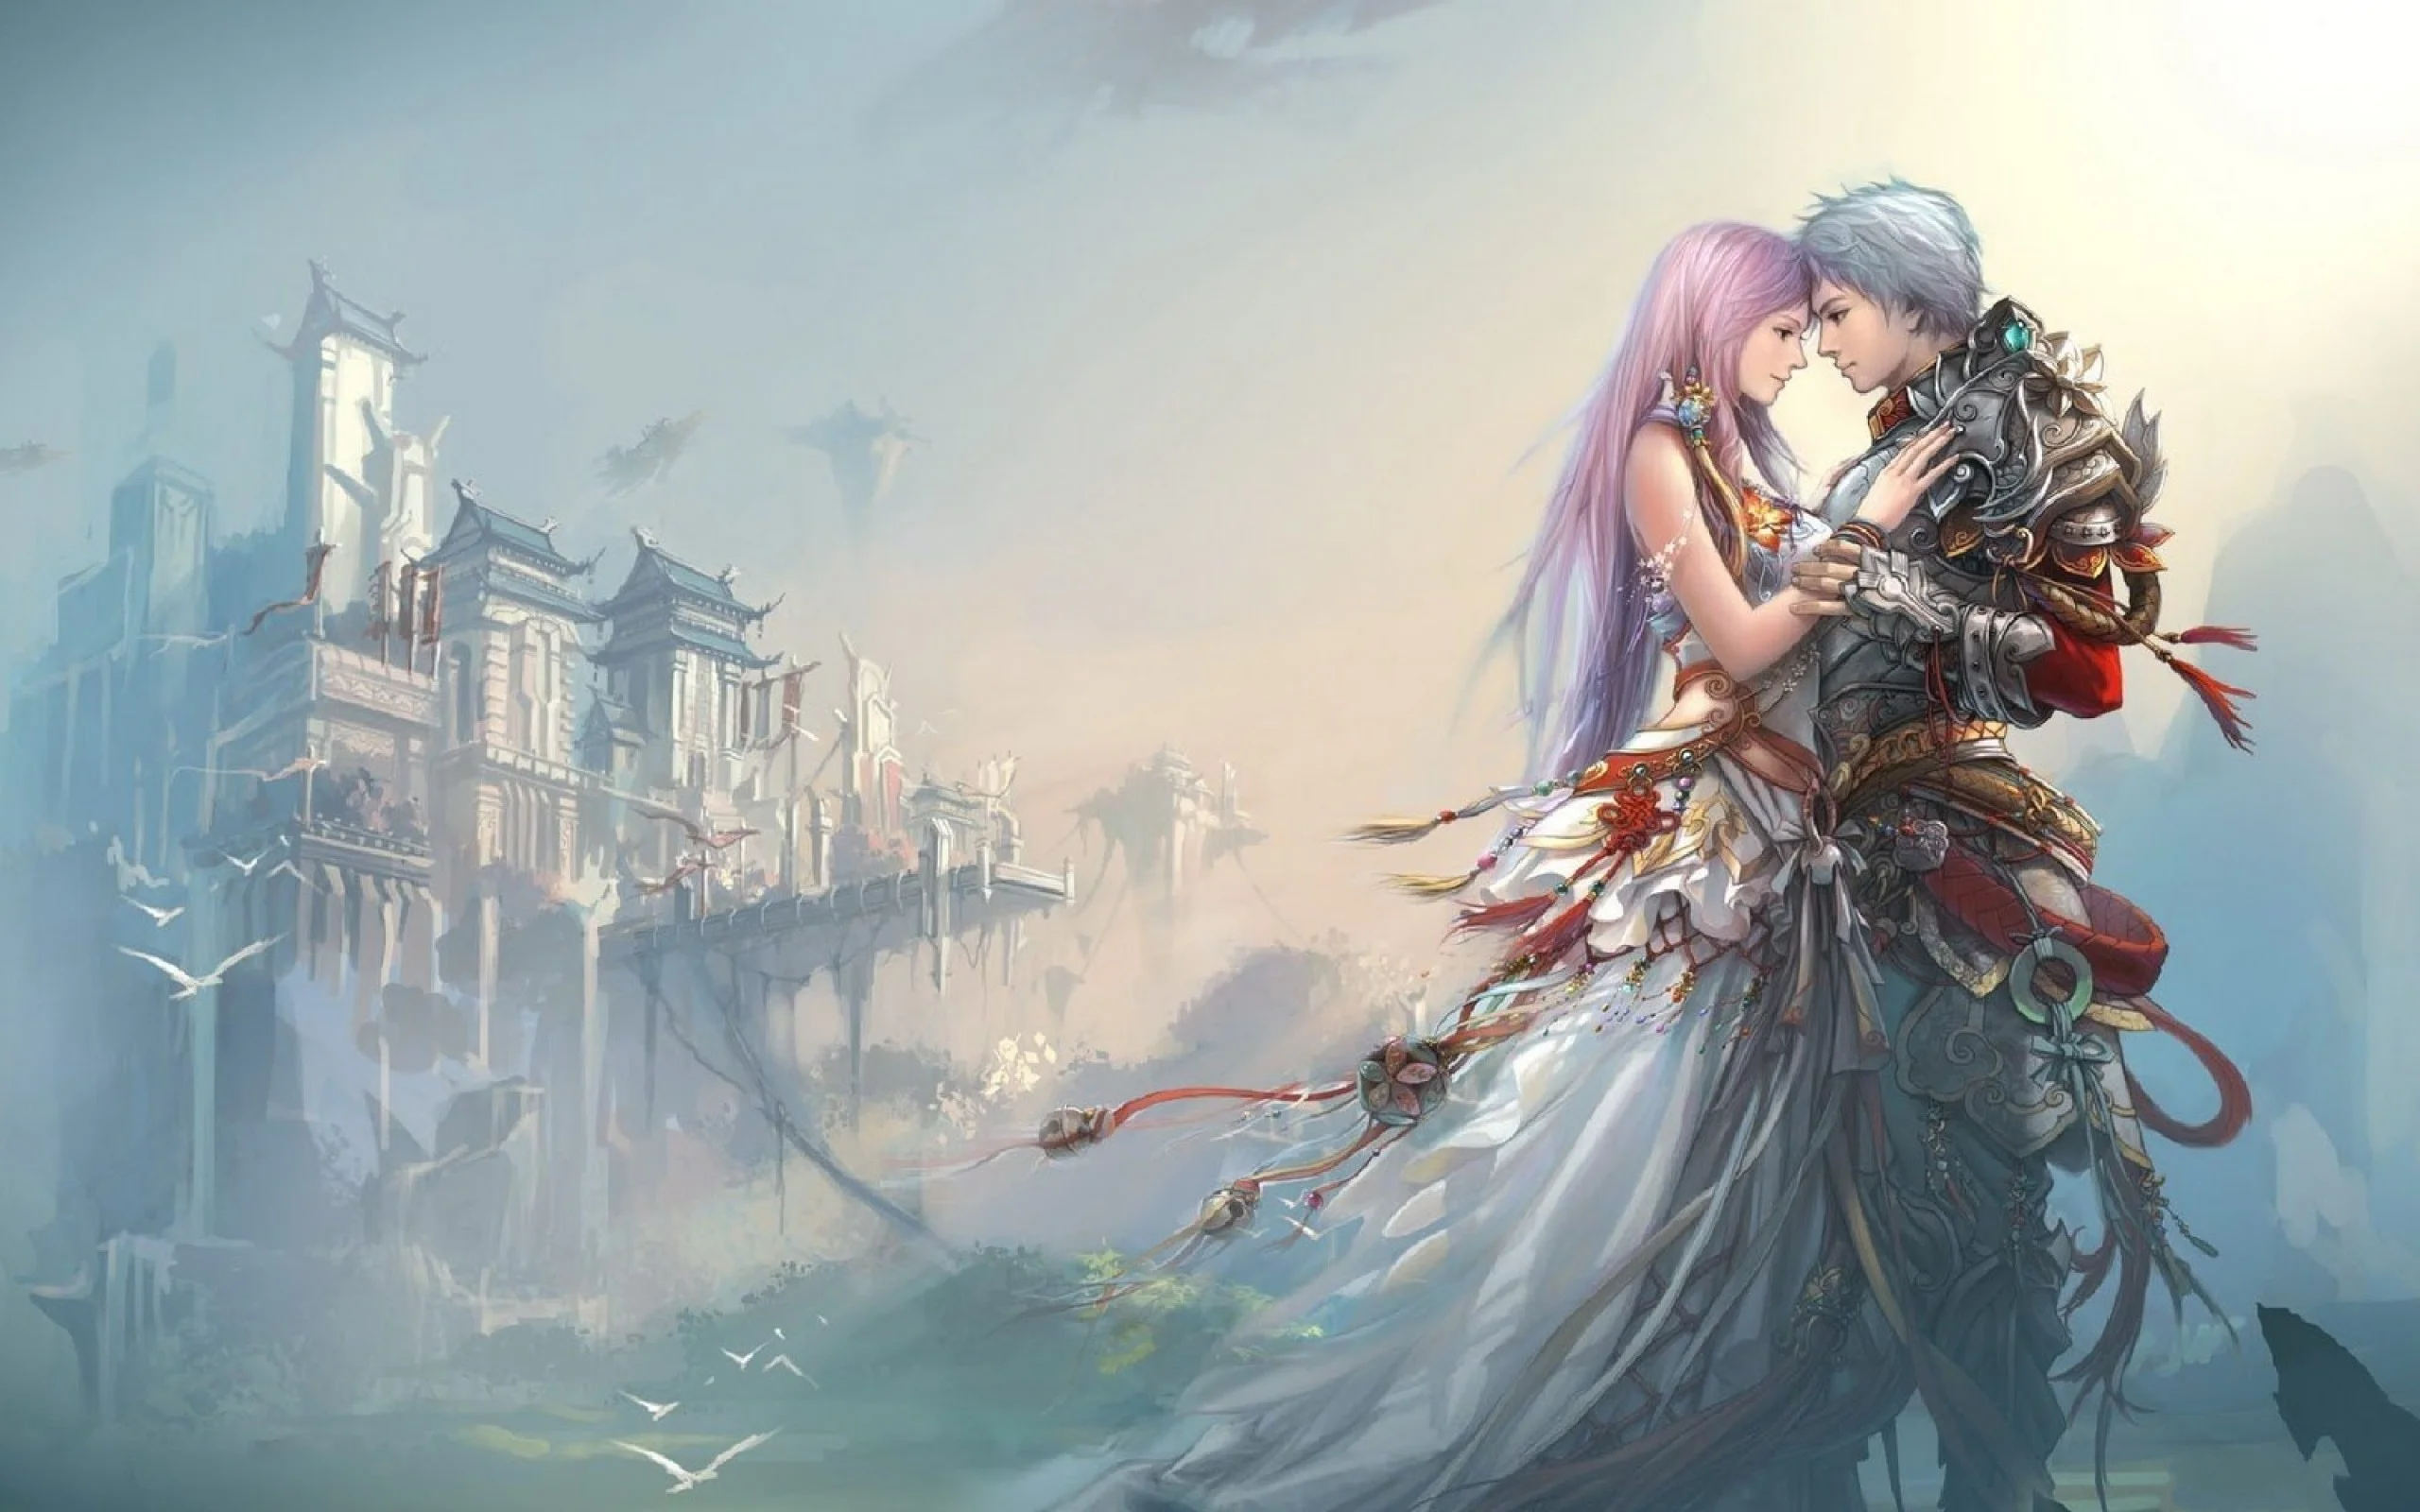 Wallpaper.wiki Free Download Cute Anime Couple Background PIC WPE0010865